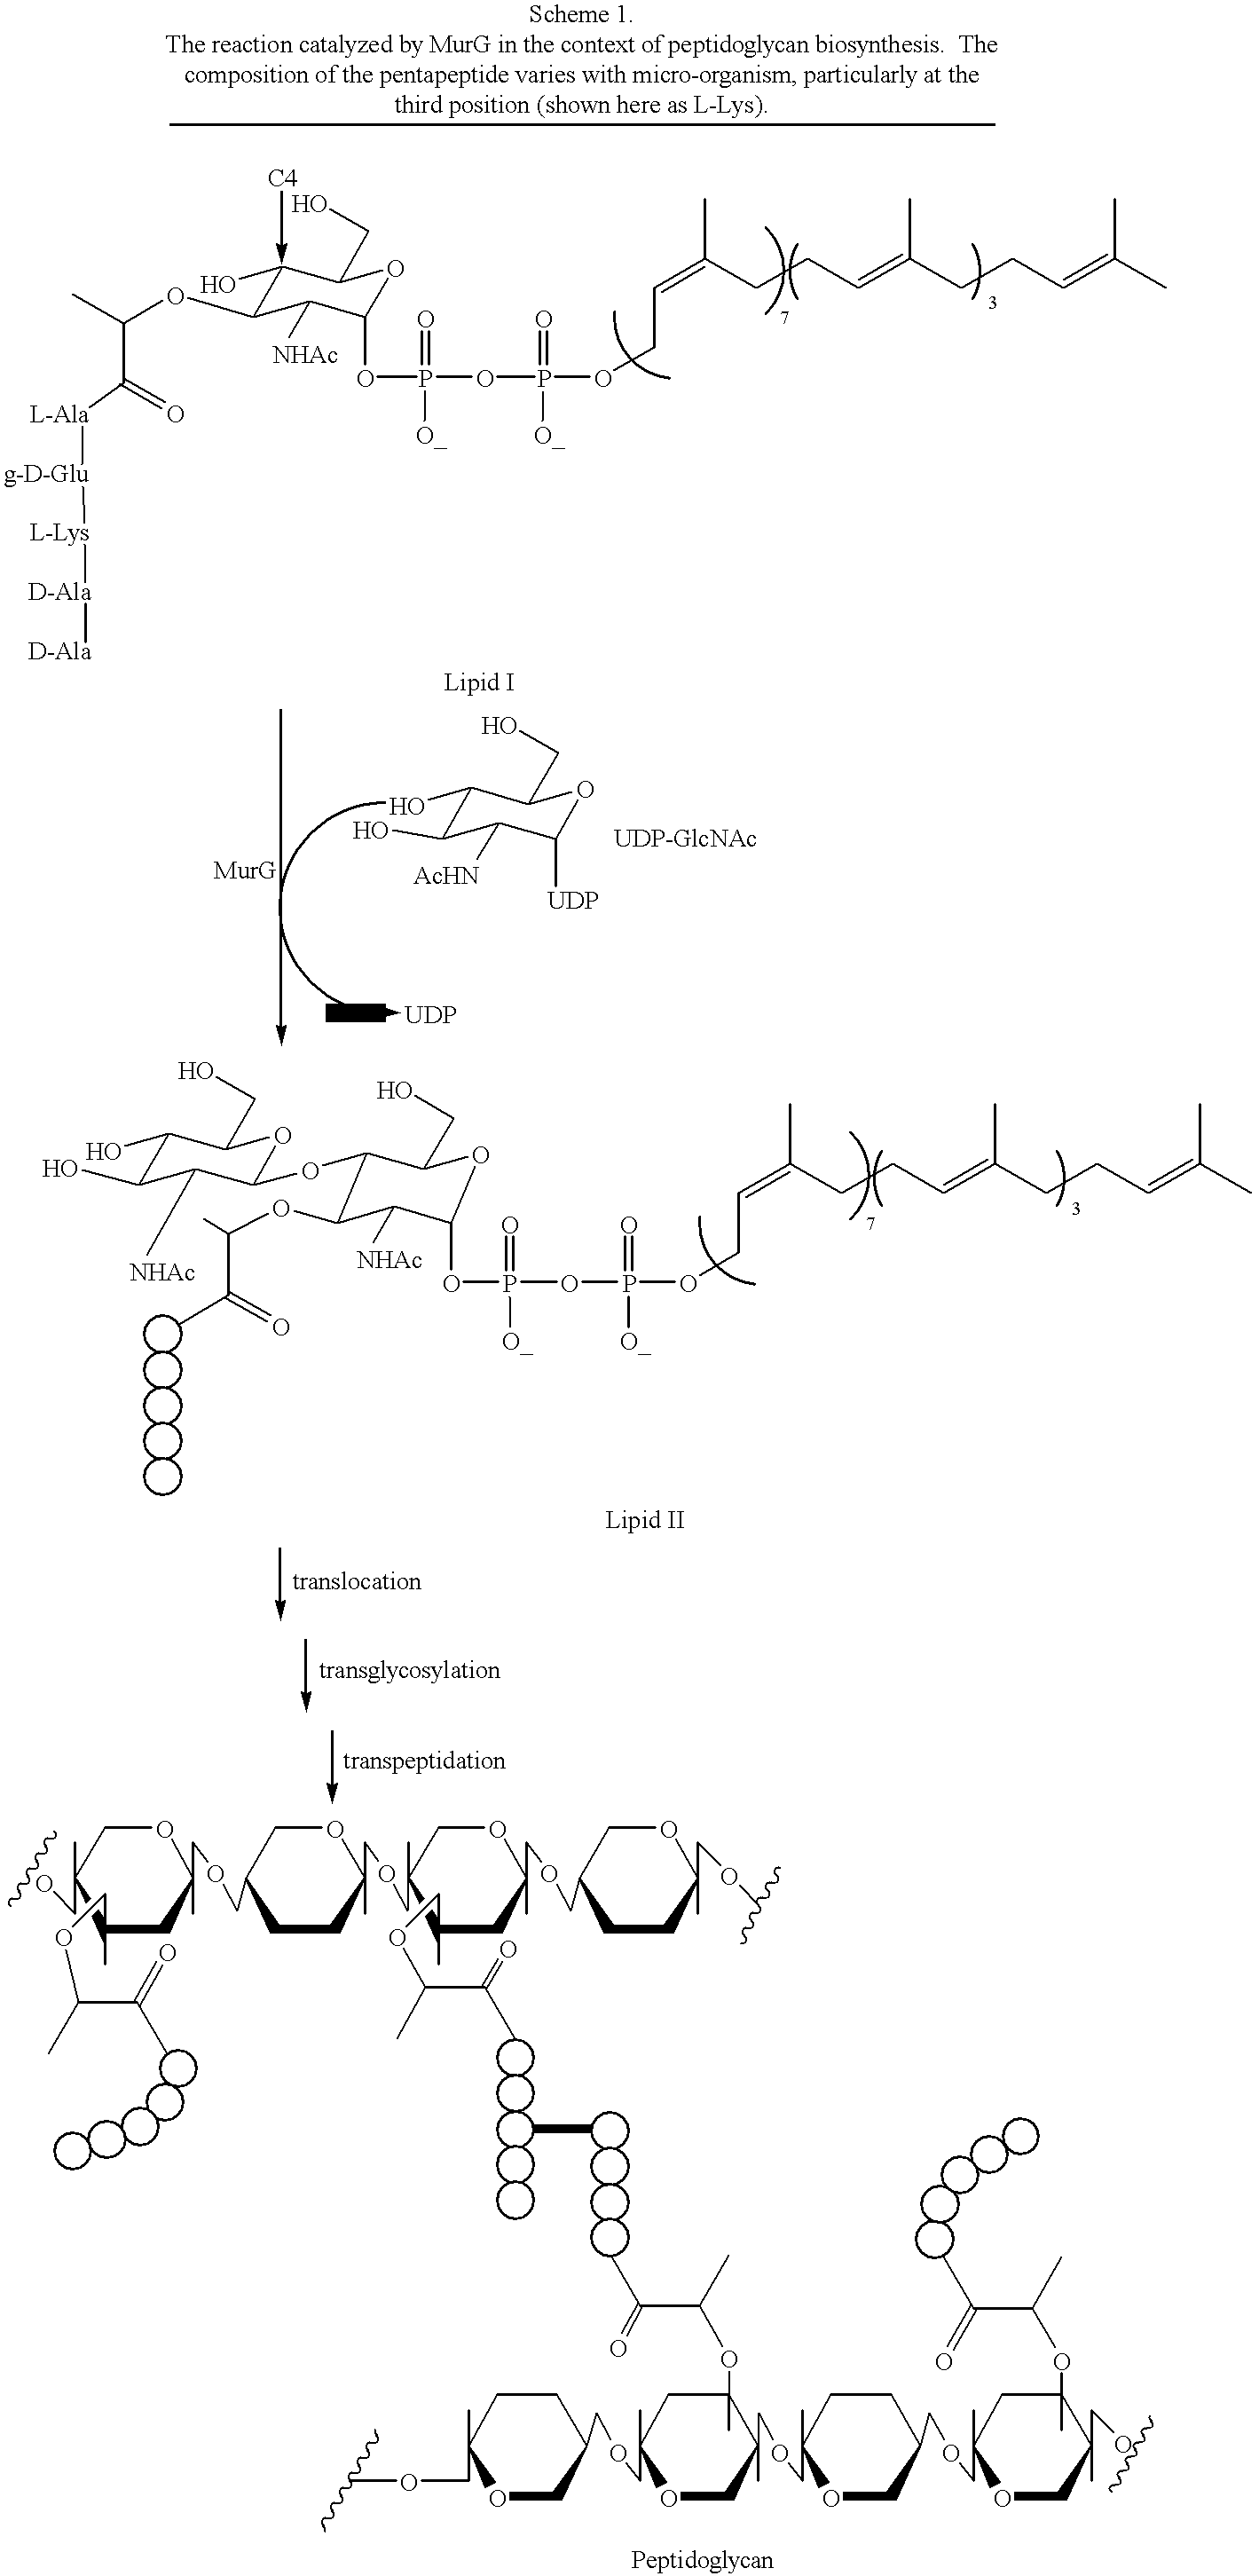 Substrate analogs that substitute for lipid I as a substrate for MurG